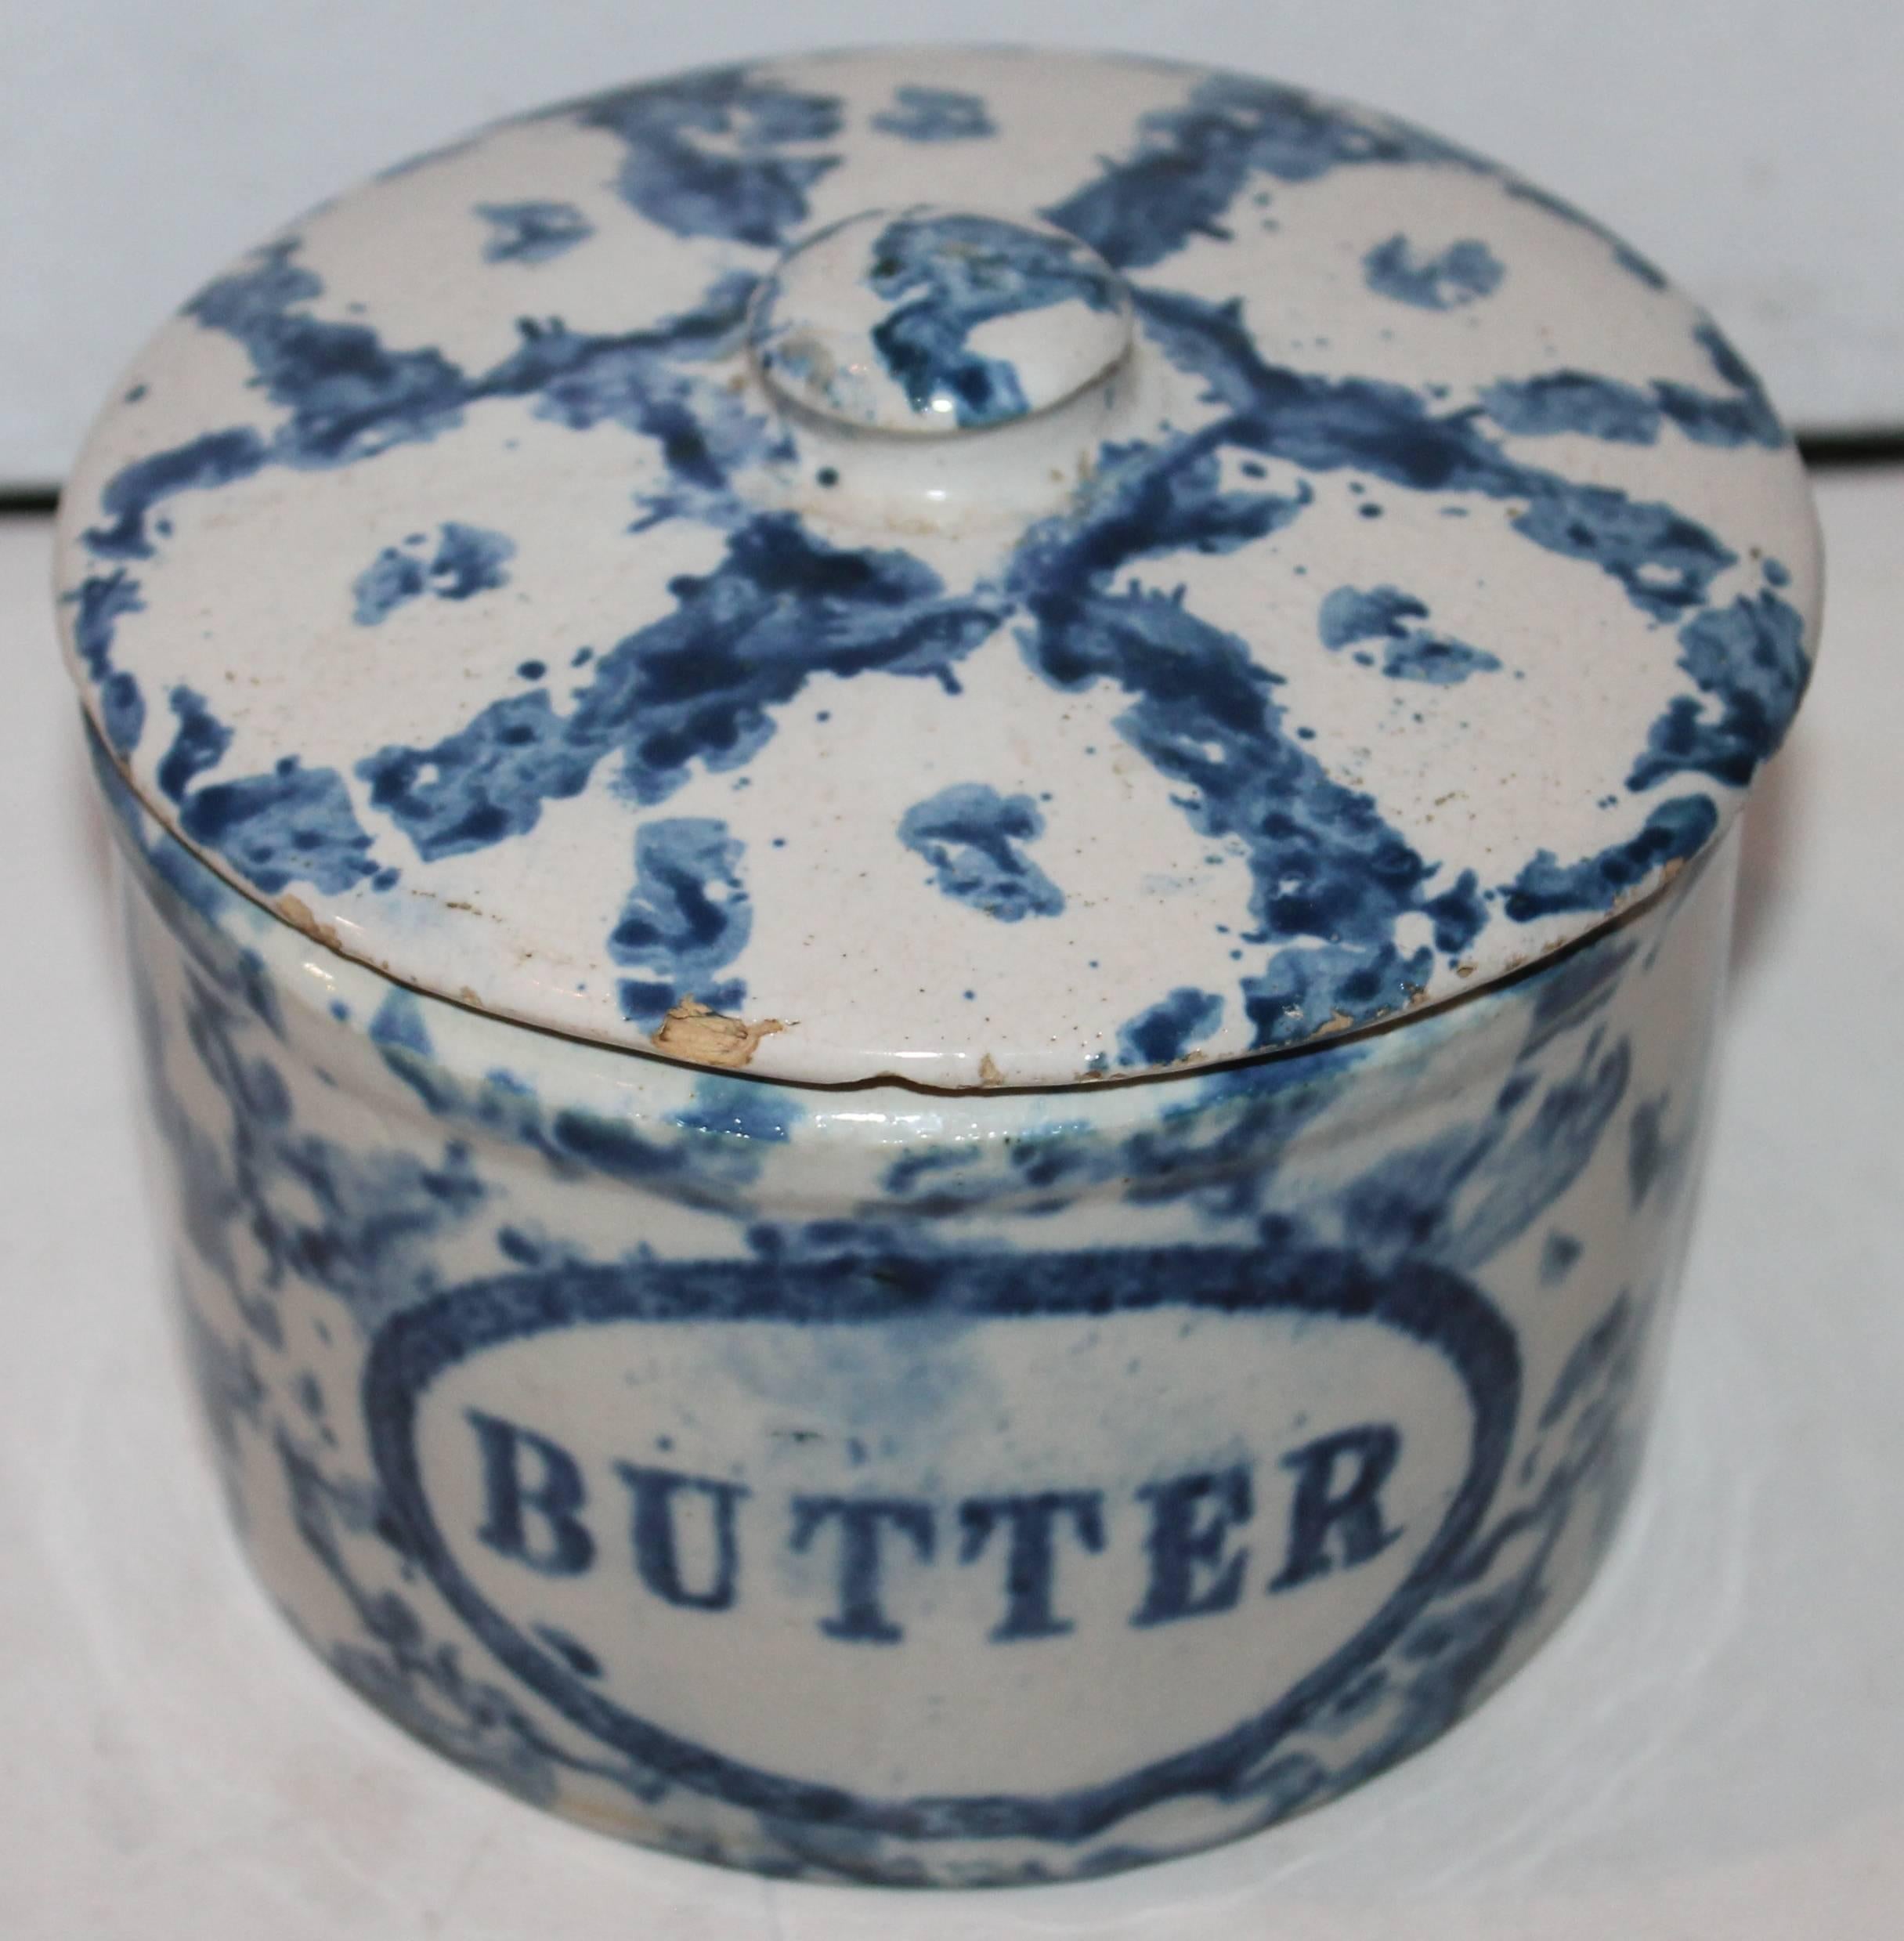 This is a fine example of unusual hard to find spongeware pottery. This is a rare sponge butter crock with the original lid. There are very minor rim chips in the lid back.